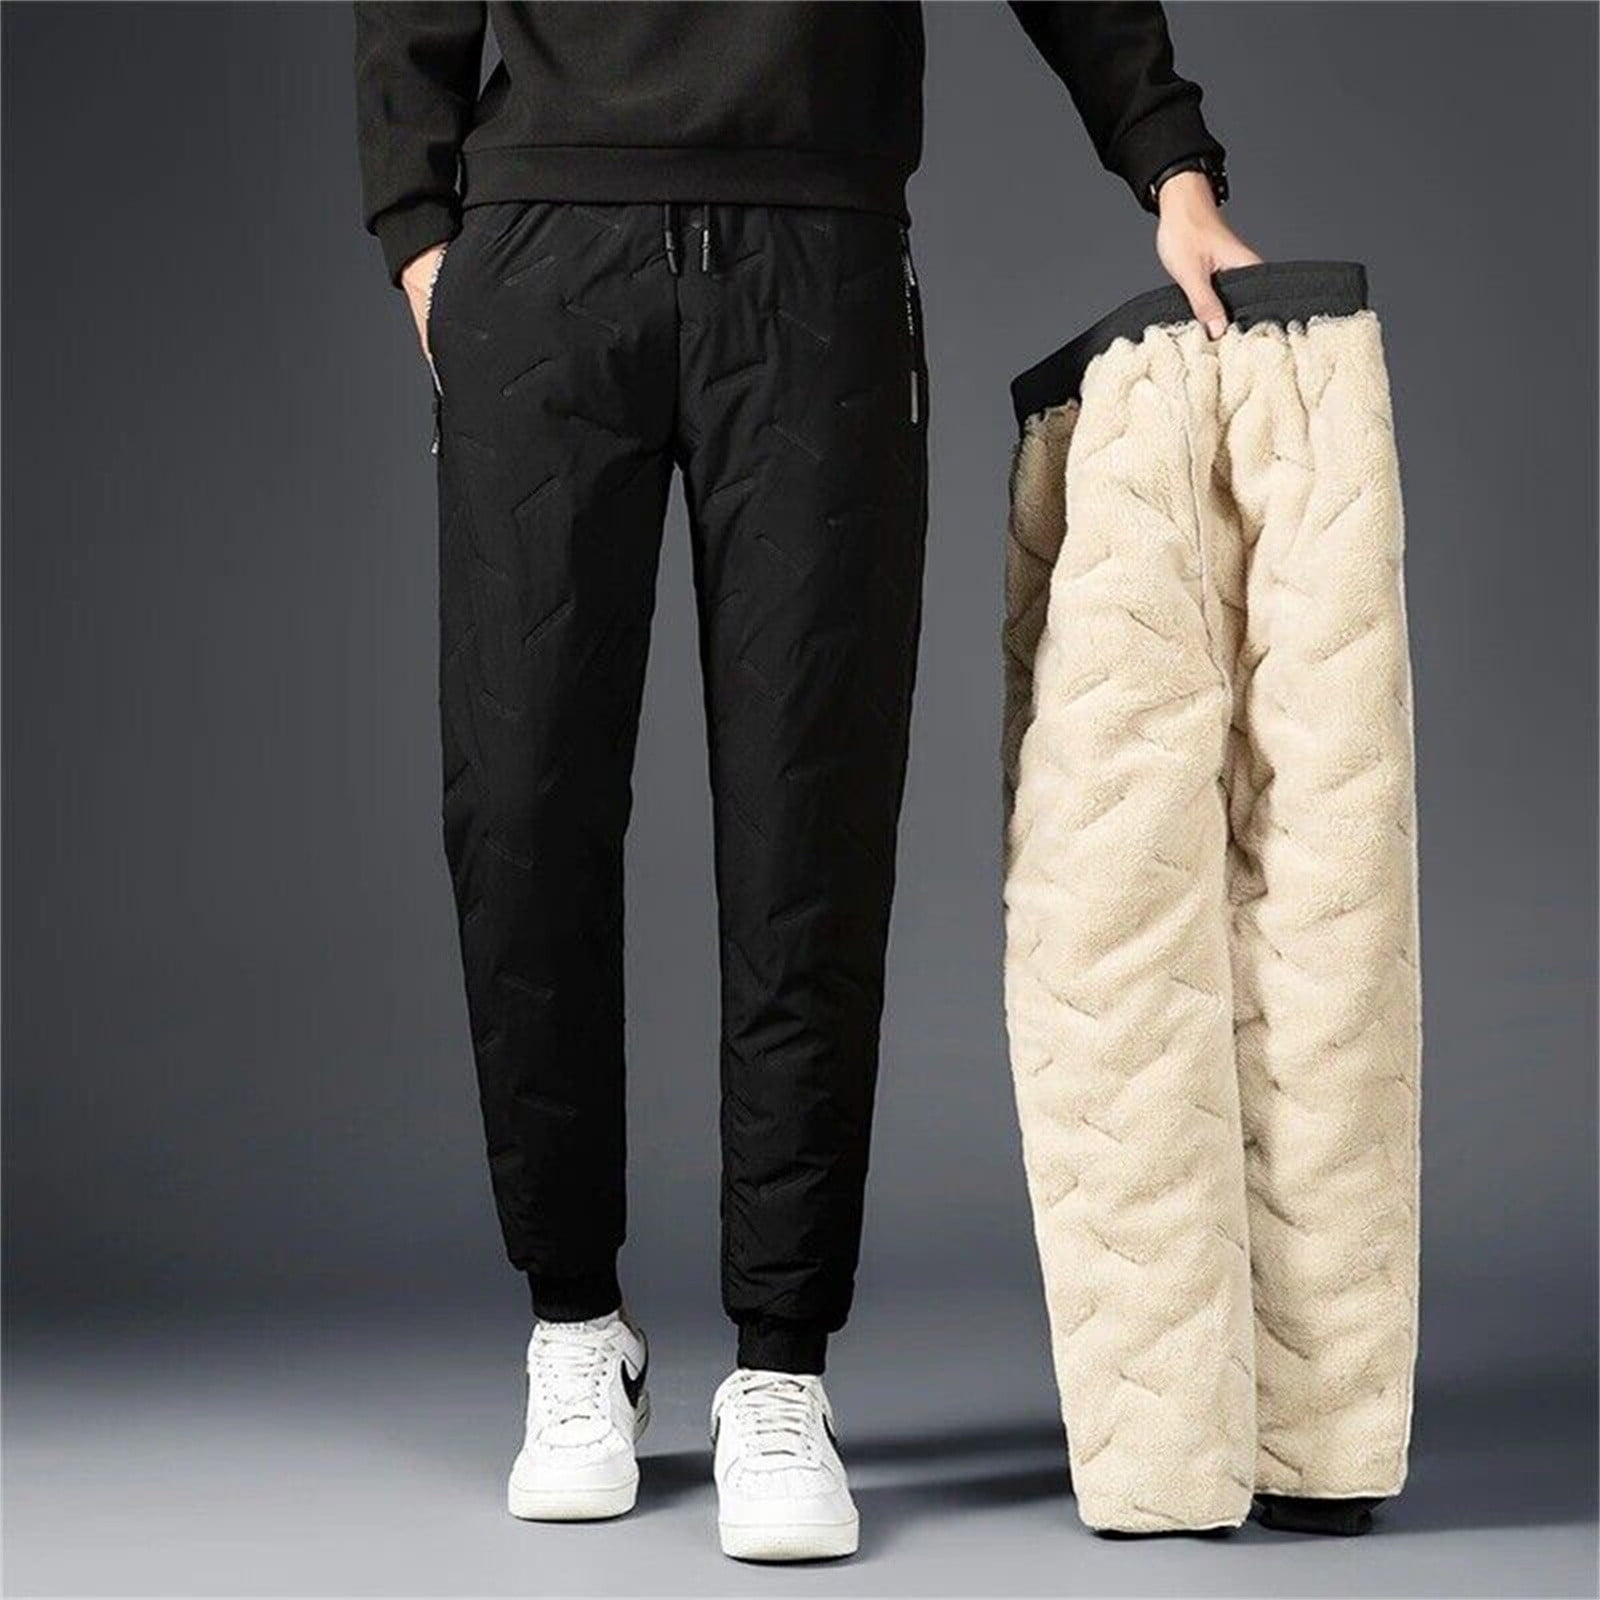 Cargo Pants Mens Lined Sweatpants Winter Warm Fuzzy Leggings Joggers Heavy  Duty Active Running Pants Trousers